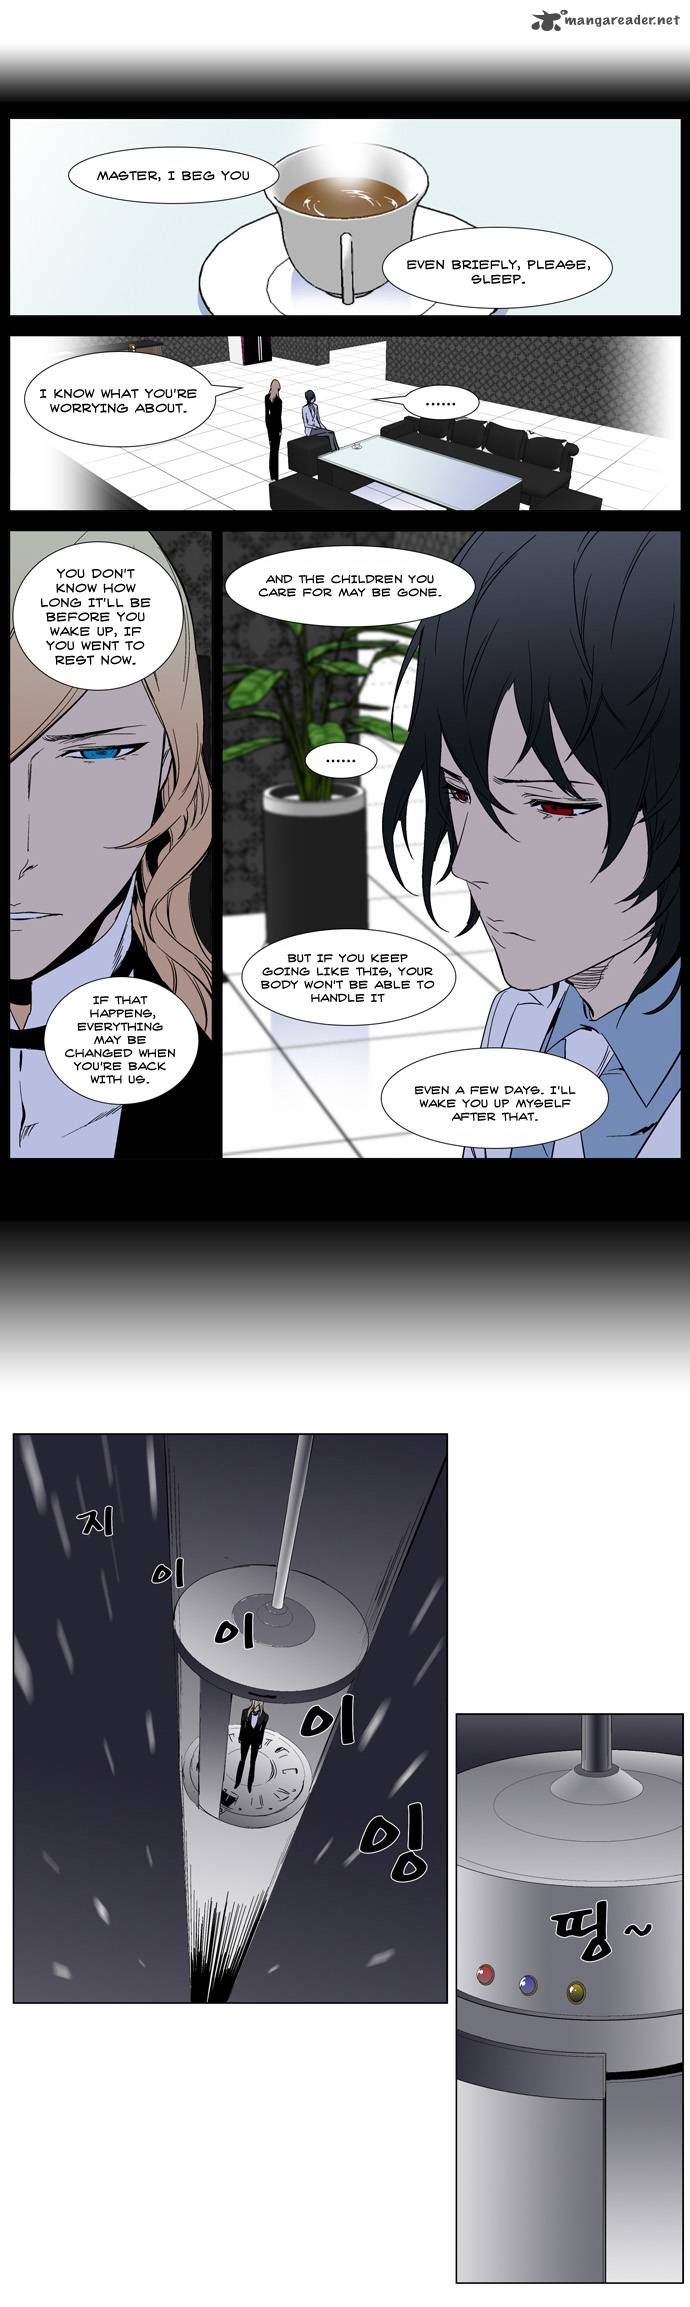 Noblesse 263 19